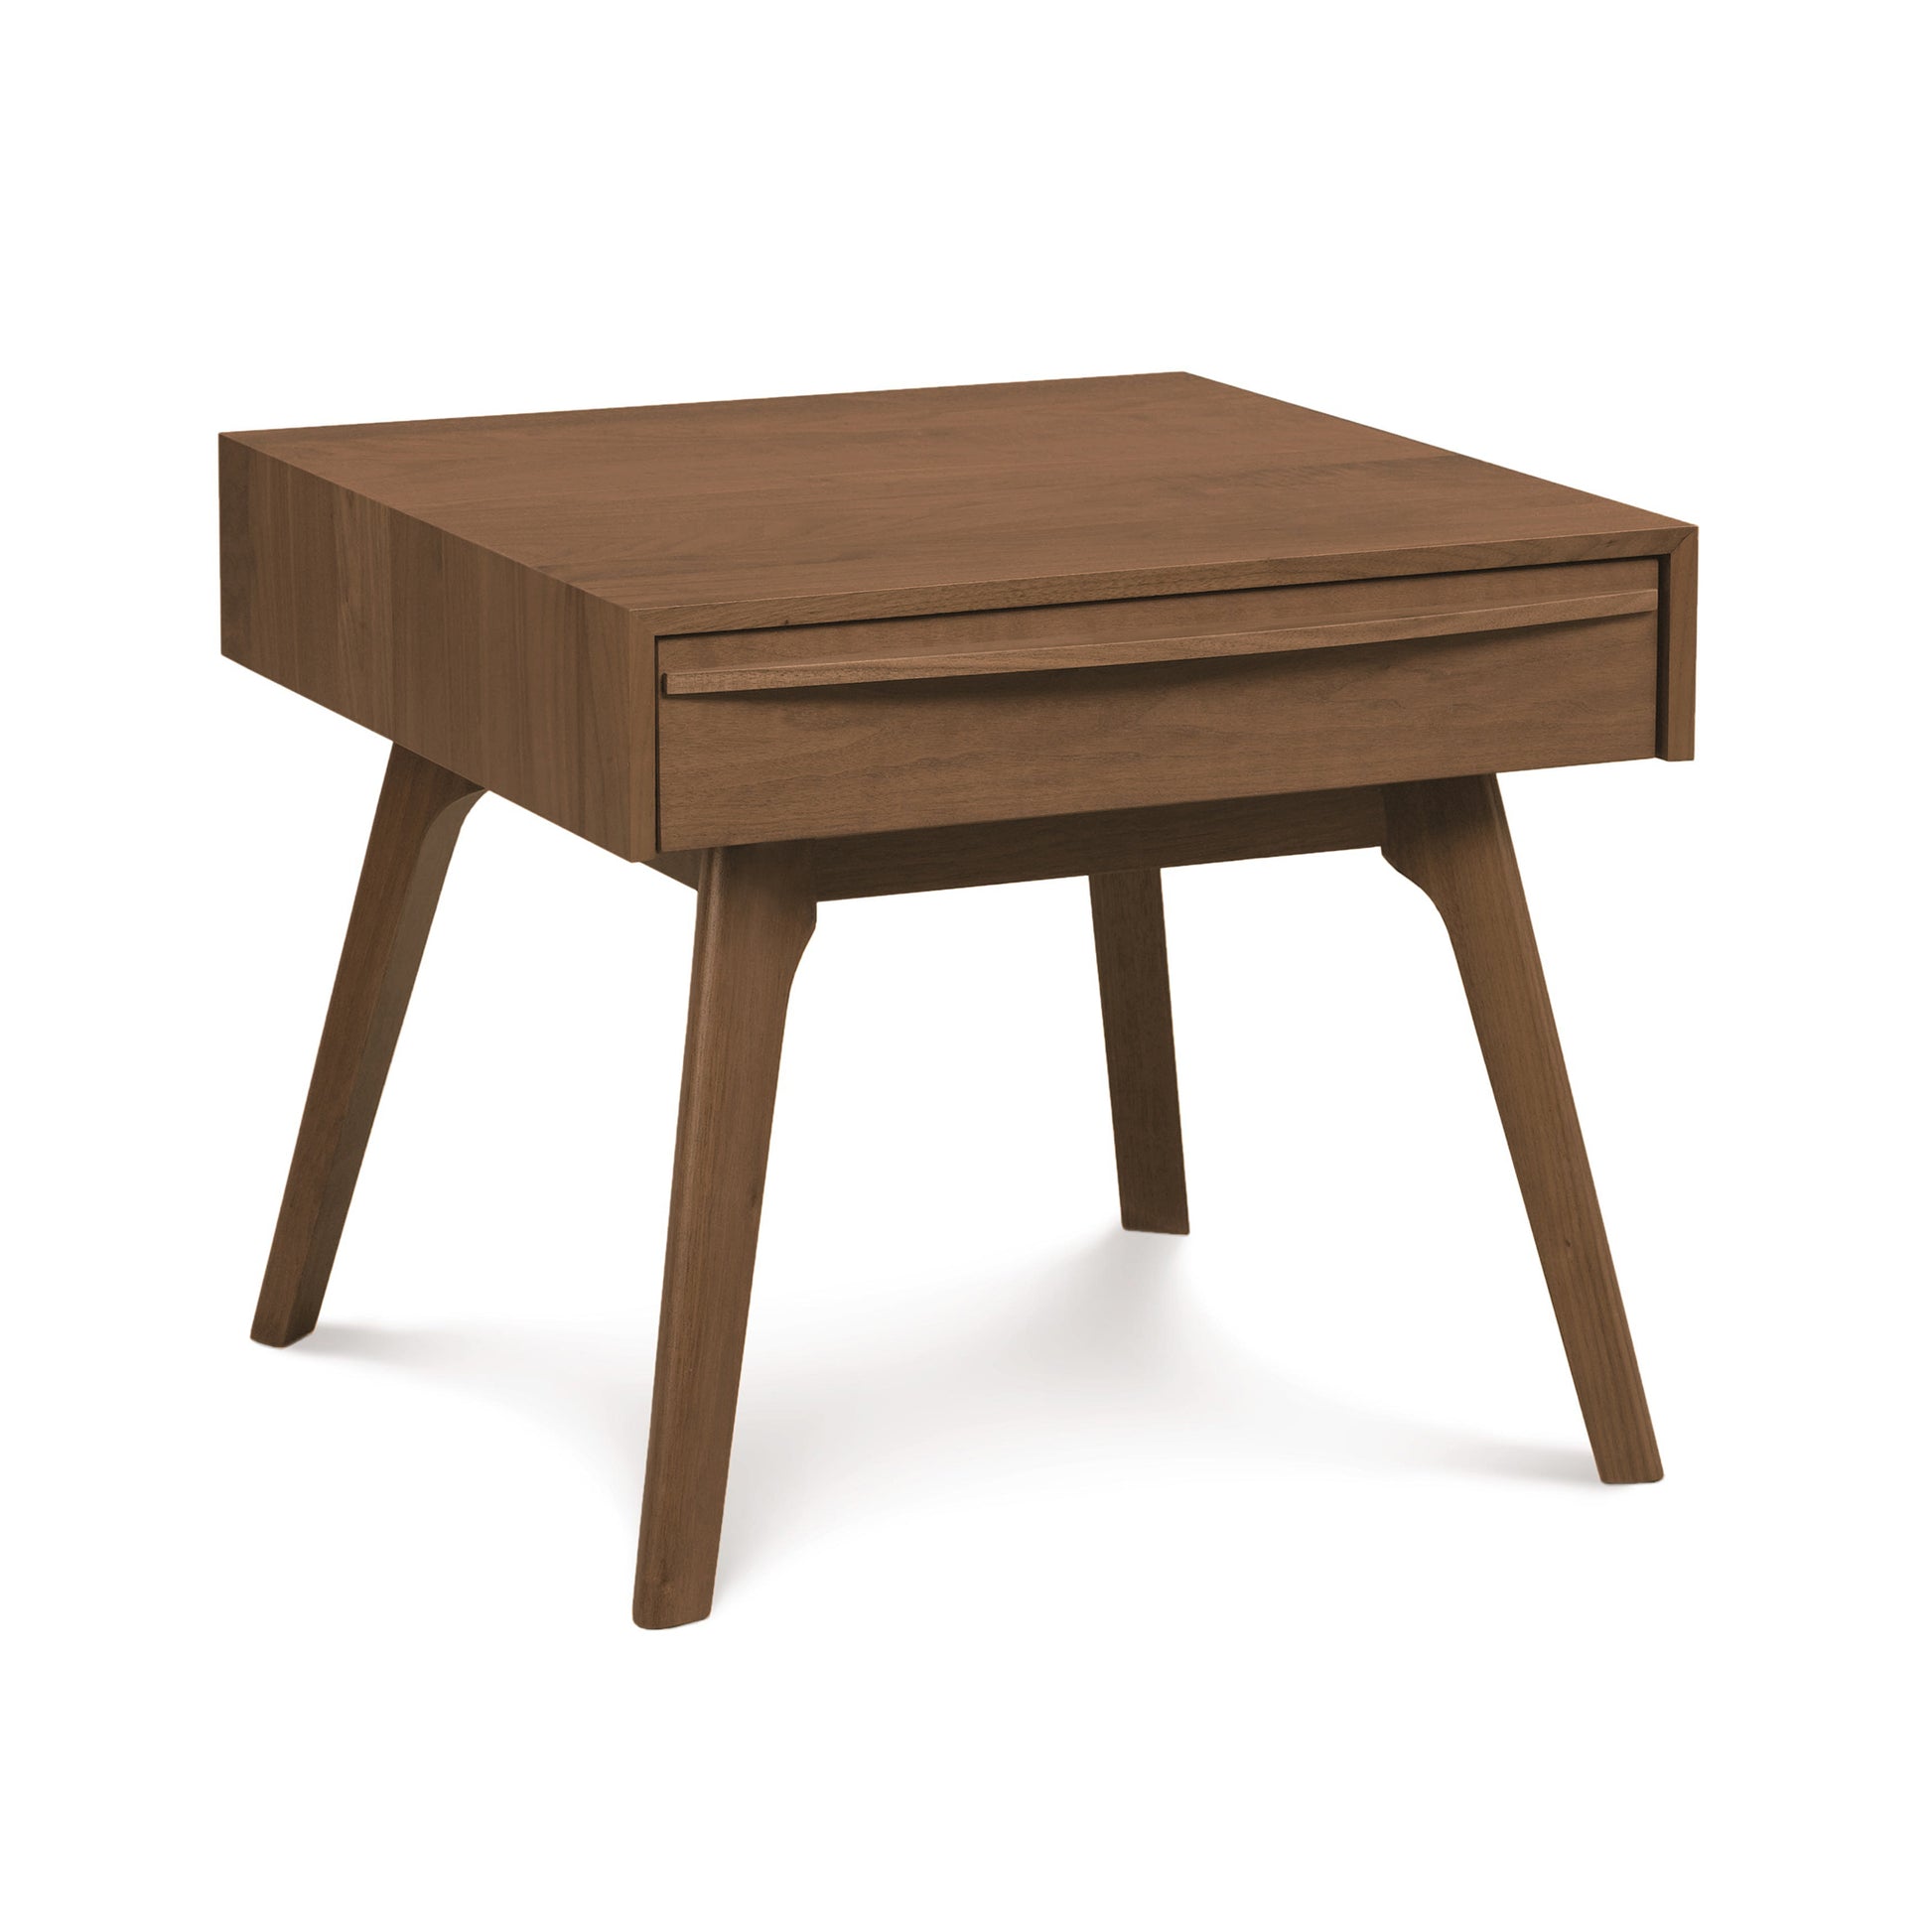 A wooden Copeland Furniture Catalina 1-Drawer Nightstand with an angular design and a single drawer, standing on four splayed legs.